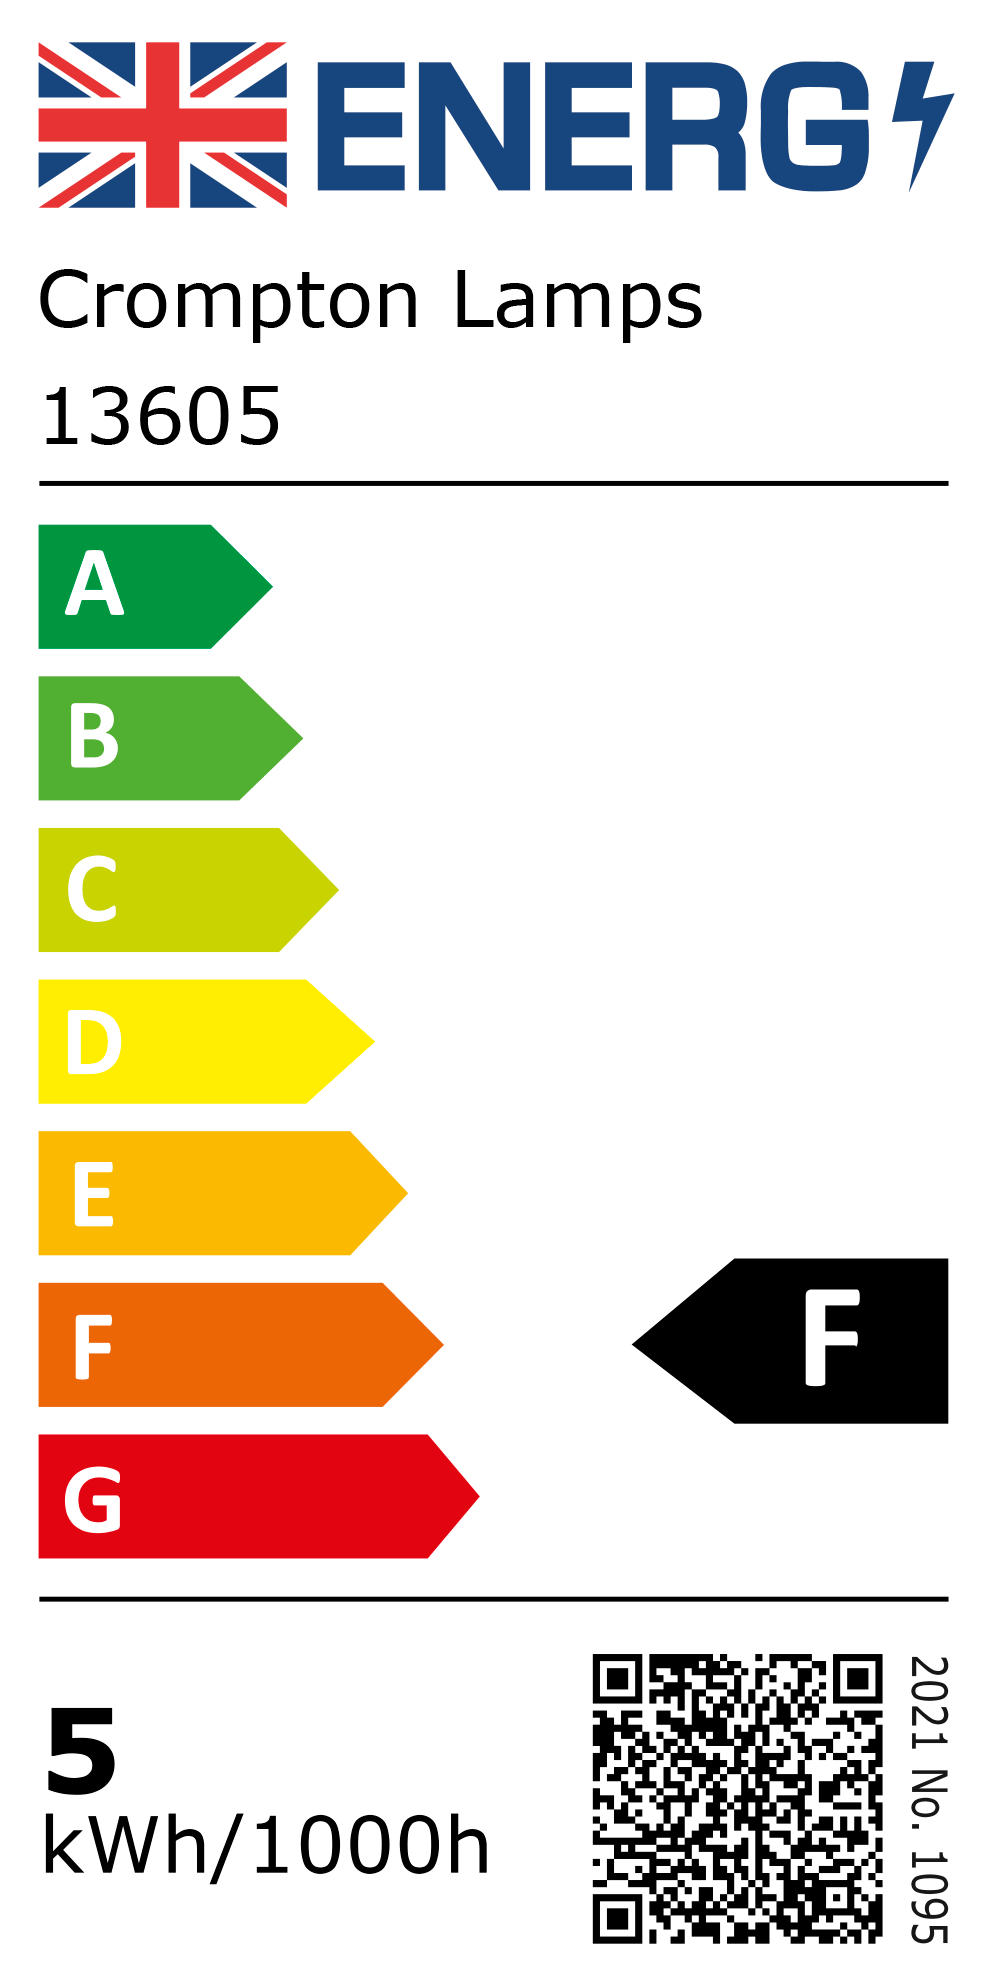 New 2021 Energy Rating Label: Stock Code 13605